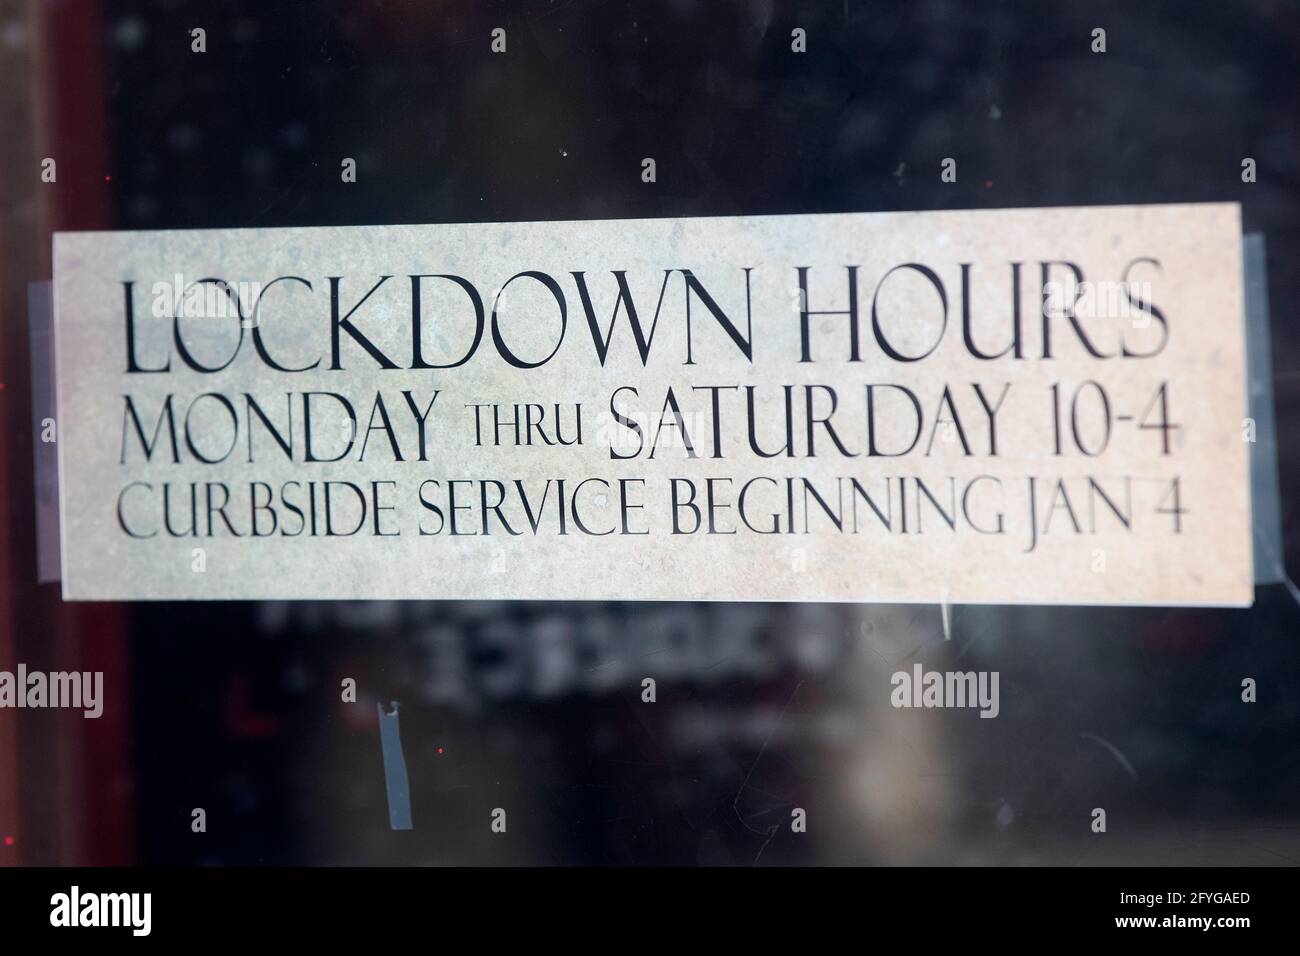 Lockdown hours for a store in Kingston, Ontario on Friday, January 8, 2021, as the COVID-19 pandemic continues across Canada and around the world. Stock Photo